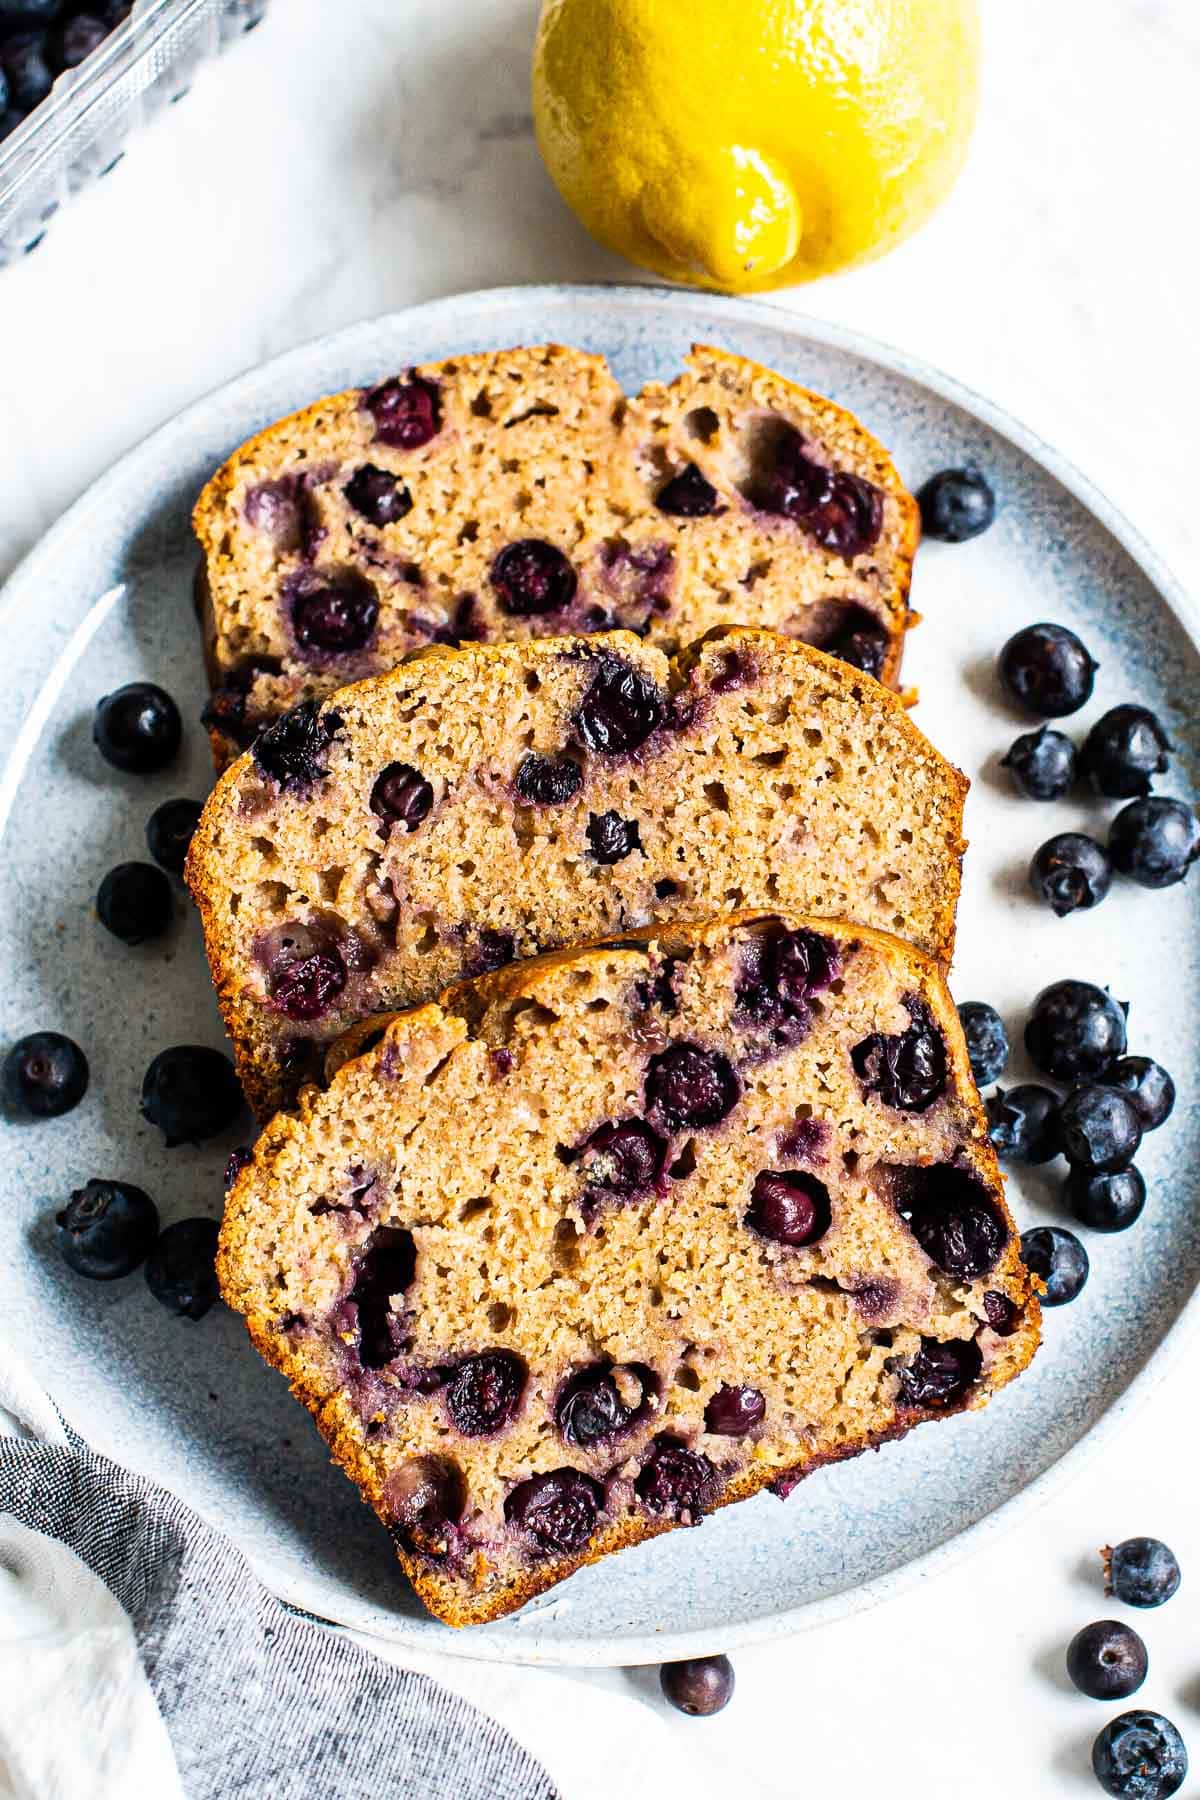 Three slices of healthy lemon blueberry bread on a plate garnished with blueberries.